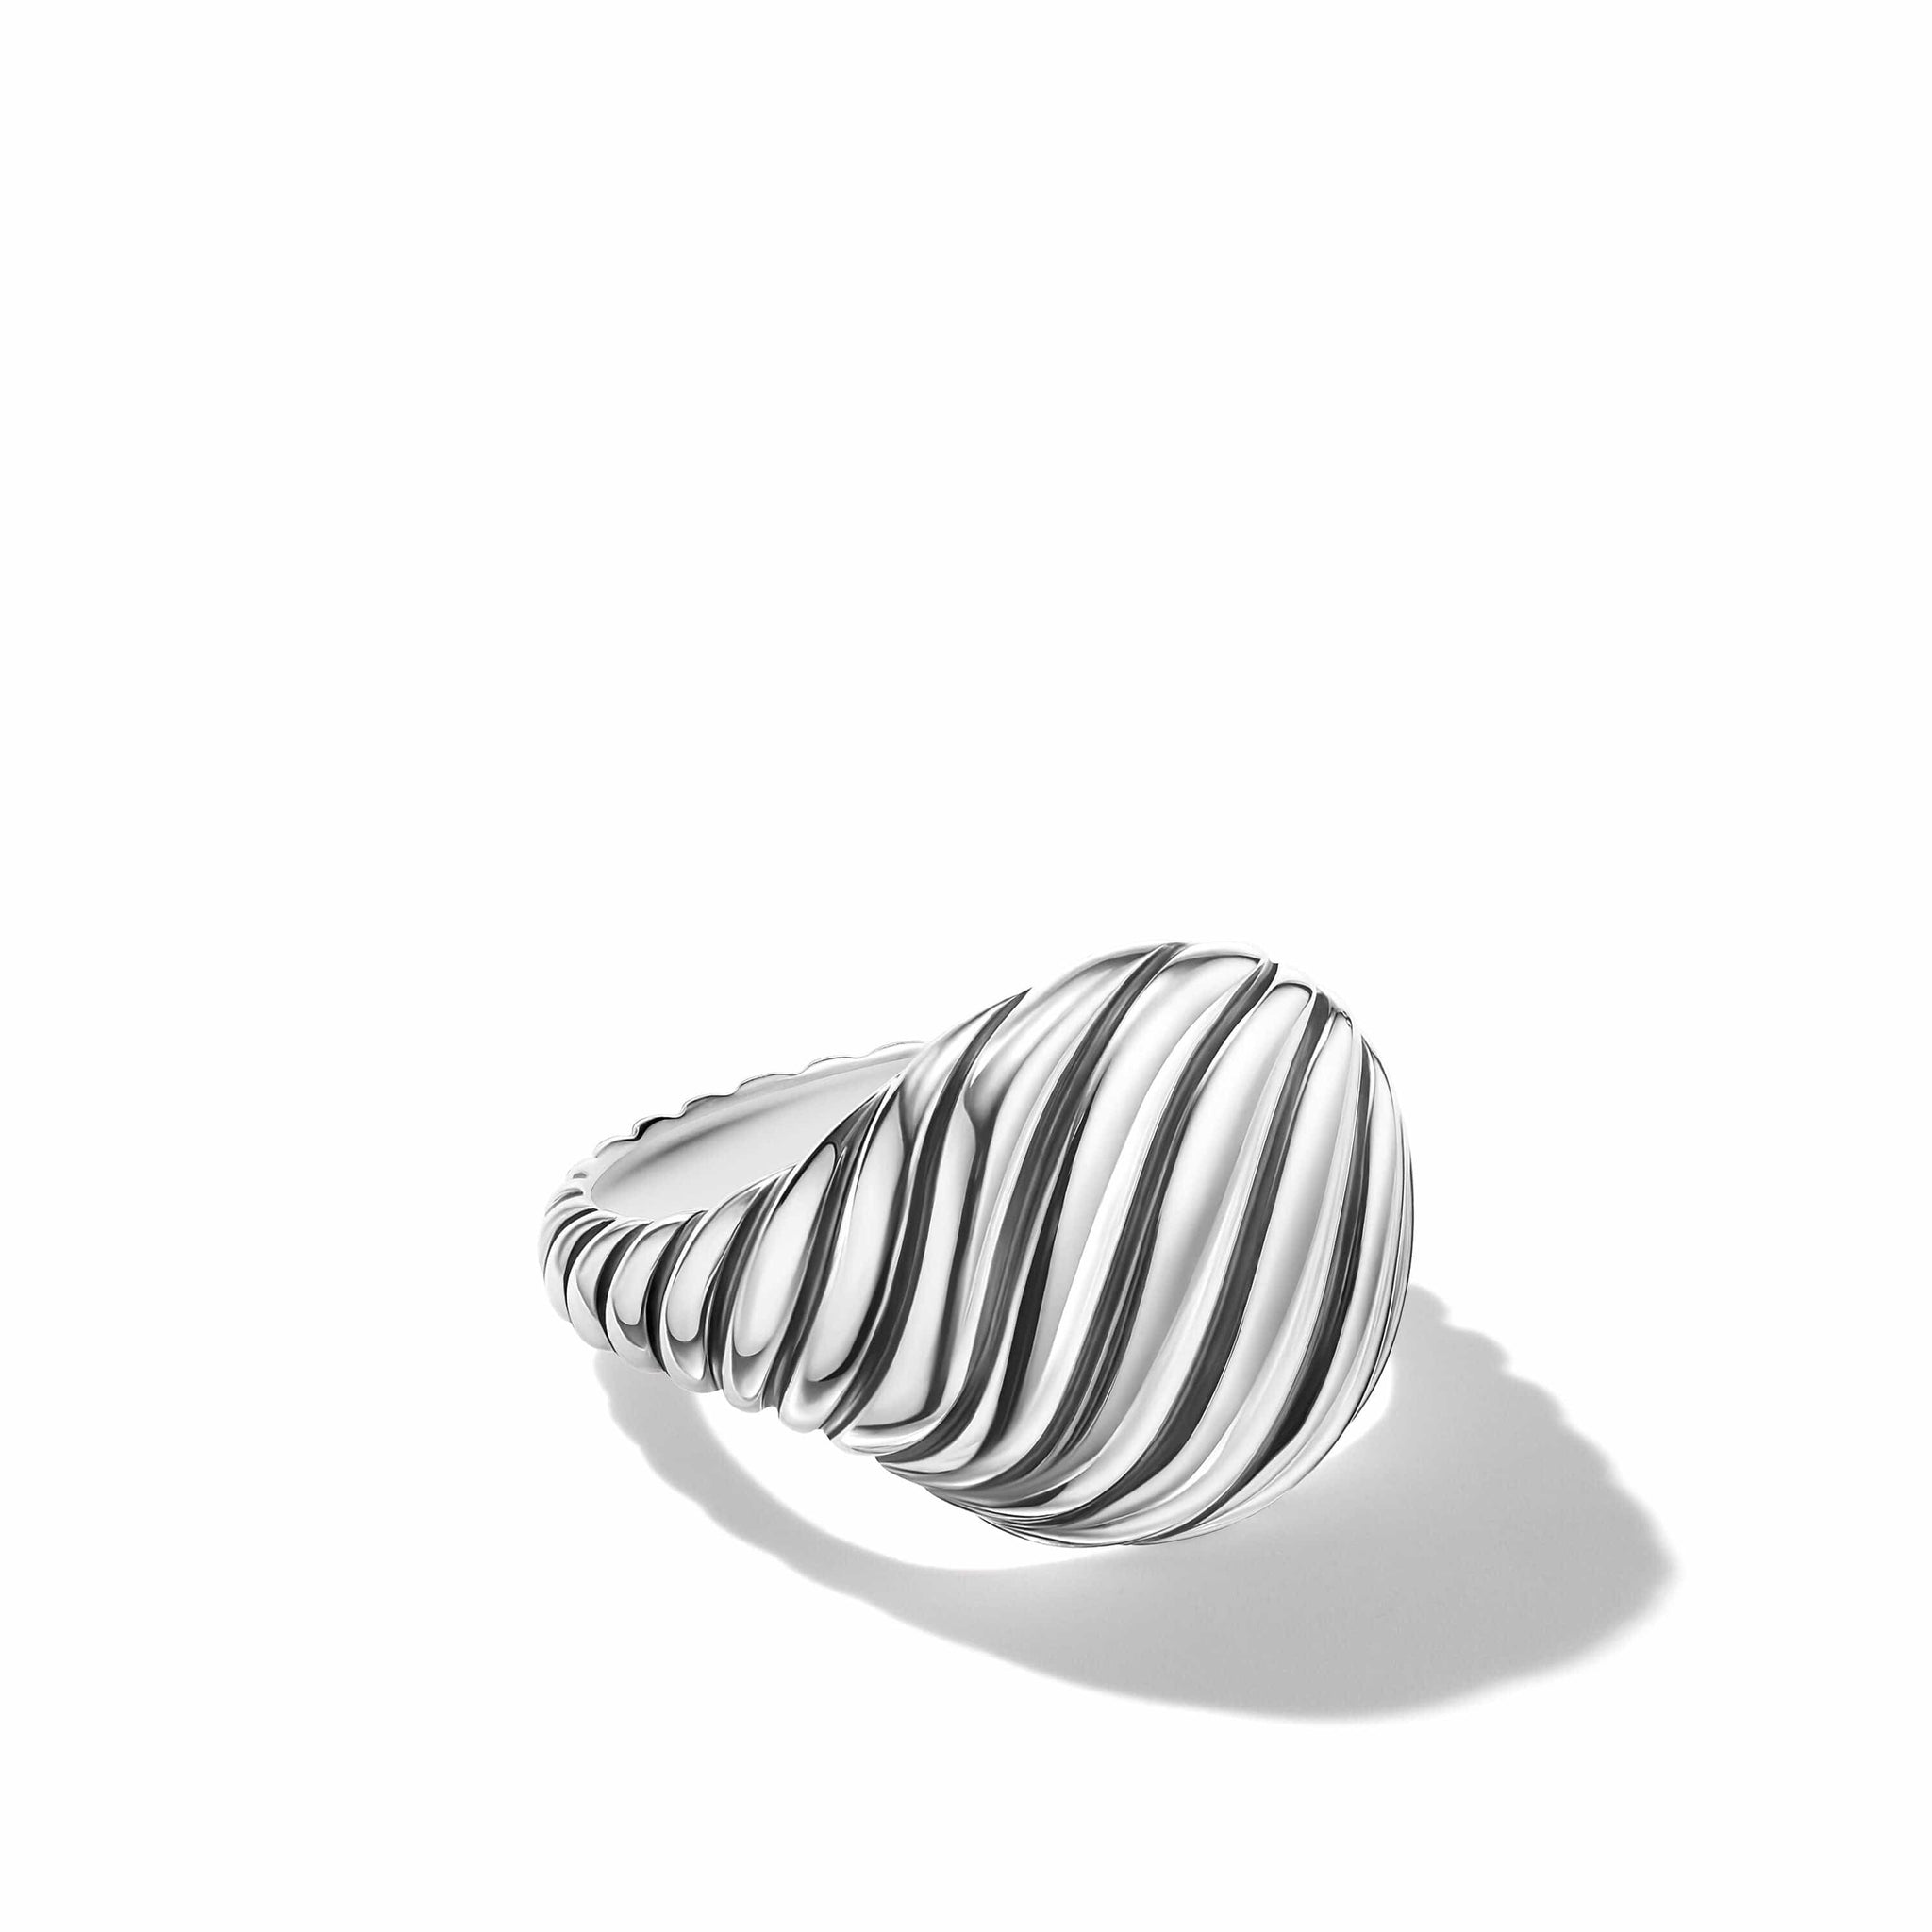 Sculpted Cable Pinky Ring in Sterling Silver